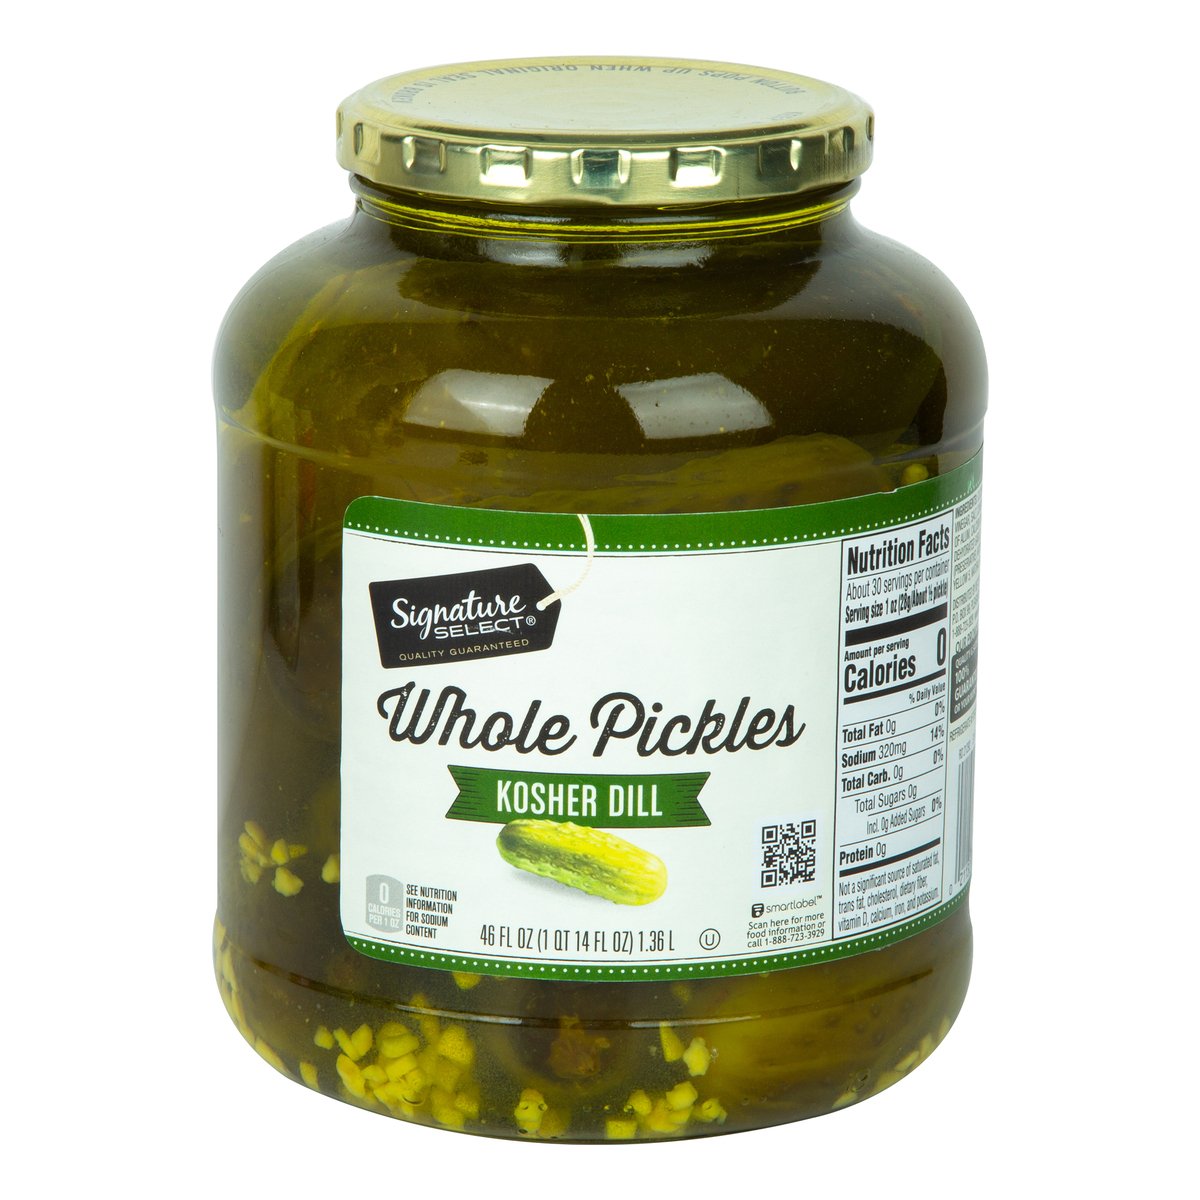 Signature Select Whole Pickle Kosher Dill 1.36 Litres